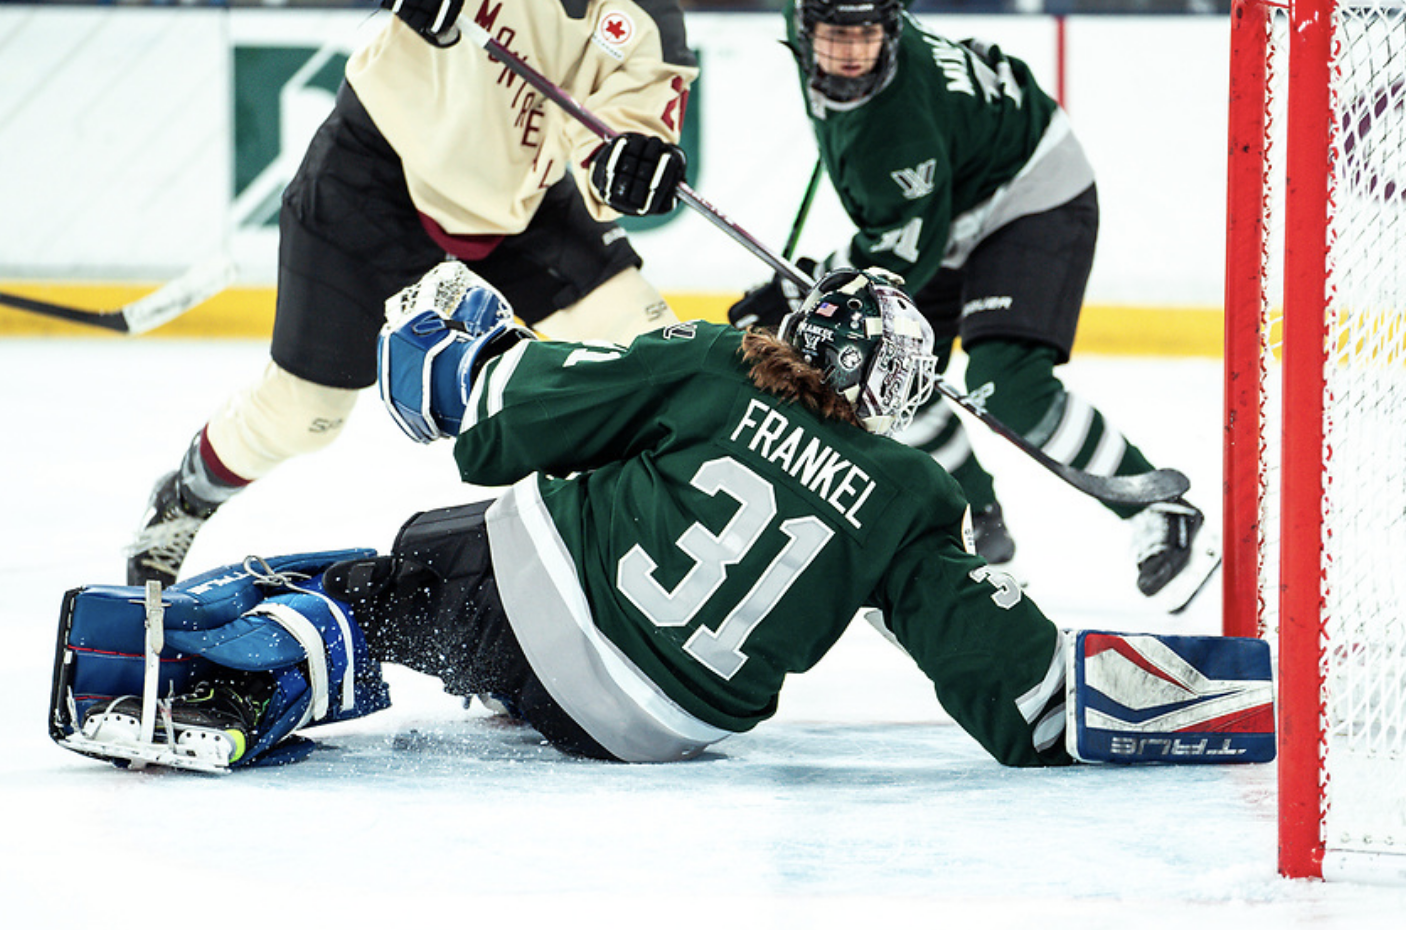 A from-behind shot of Frankel diving back towards her net to make a save with her blocker on the ice. She is wearing a green home uniform, green/white mask, and her USA pads.